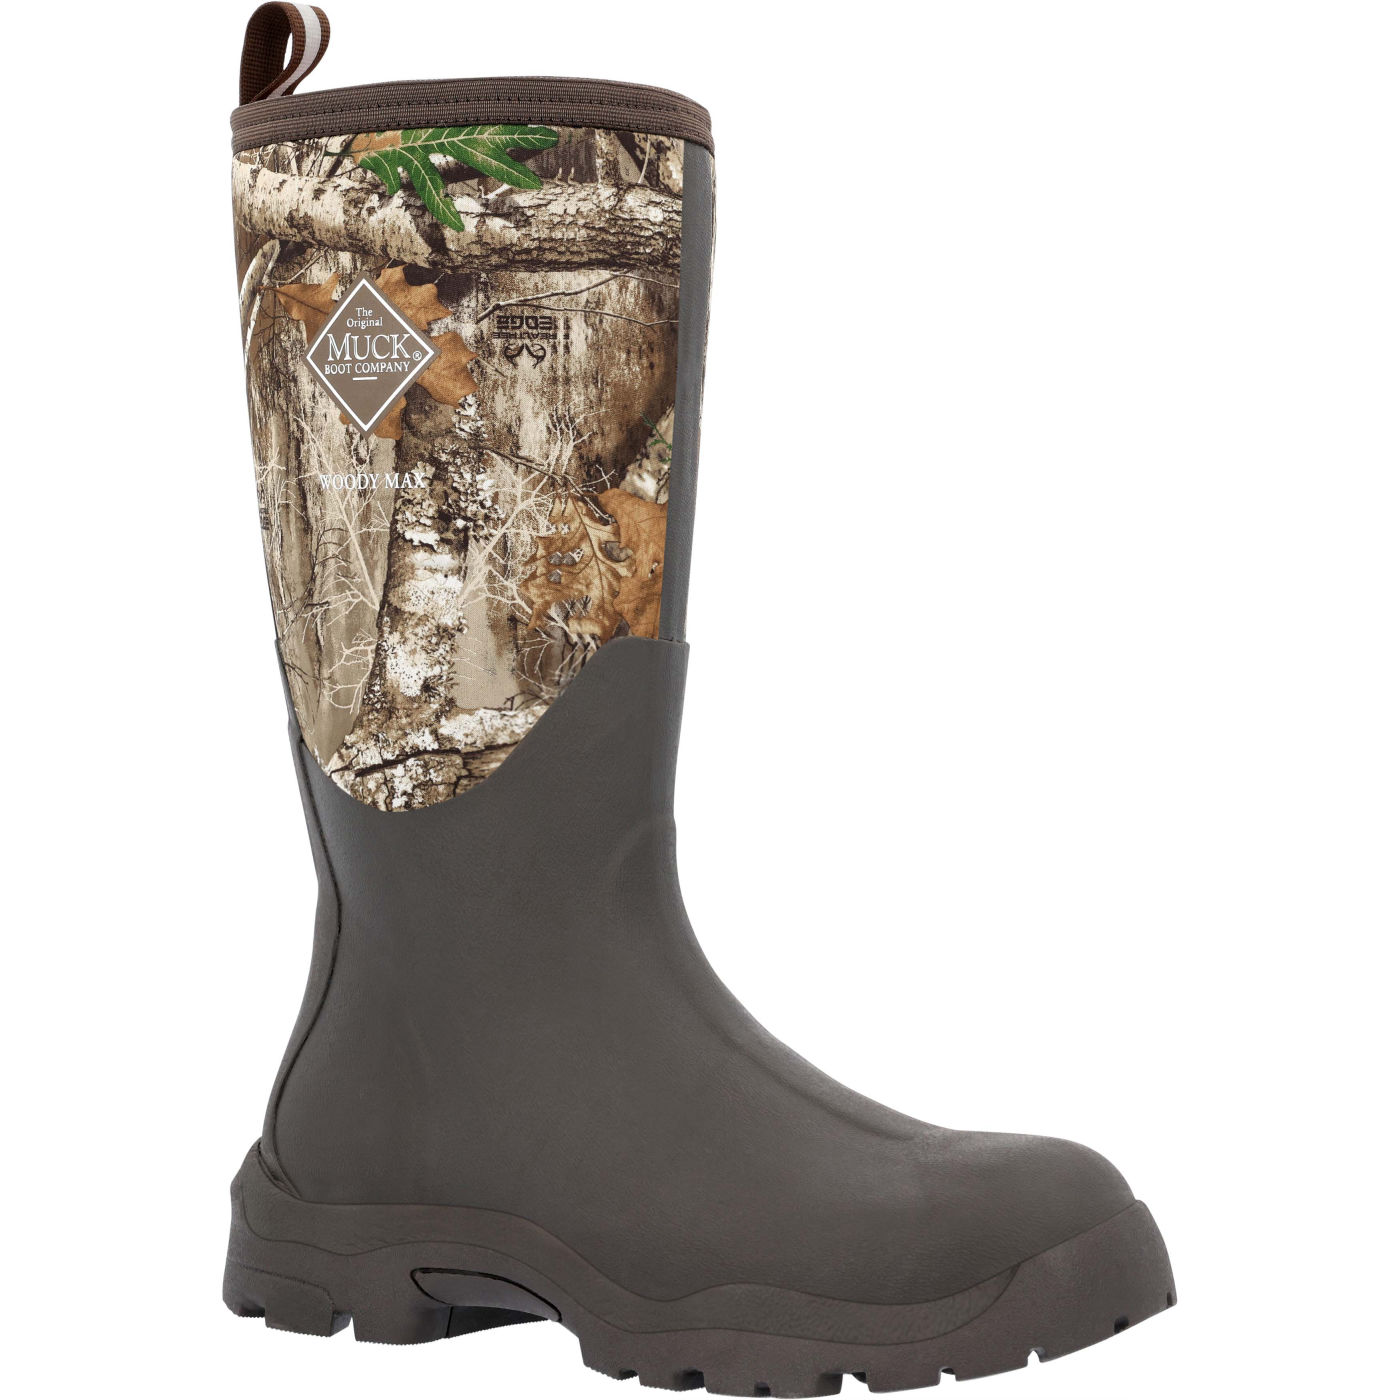 MUCK BOOTS Women's Woody Max Boot - Realtree Edge | KYGUNCO